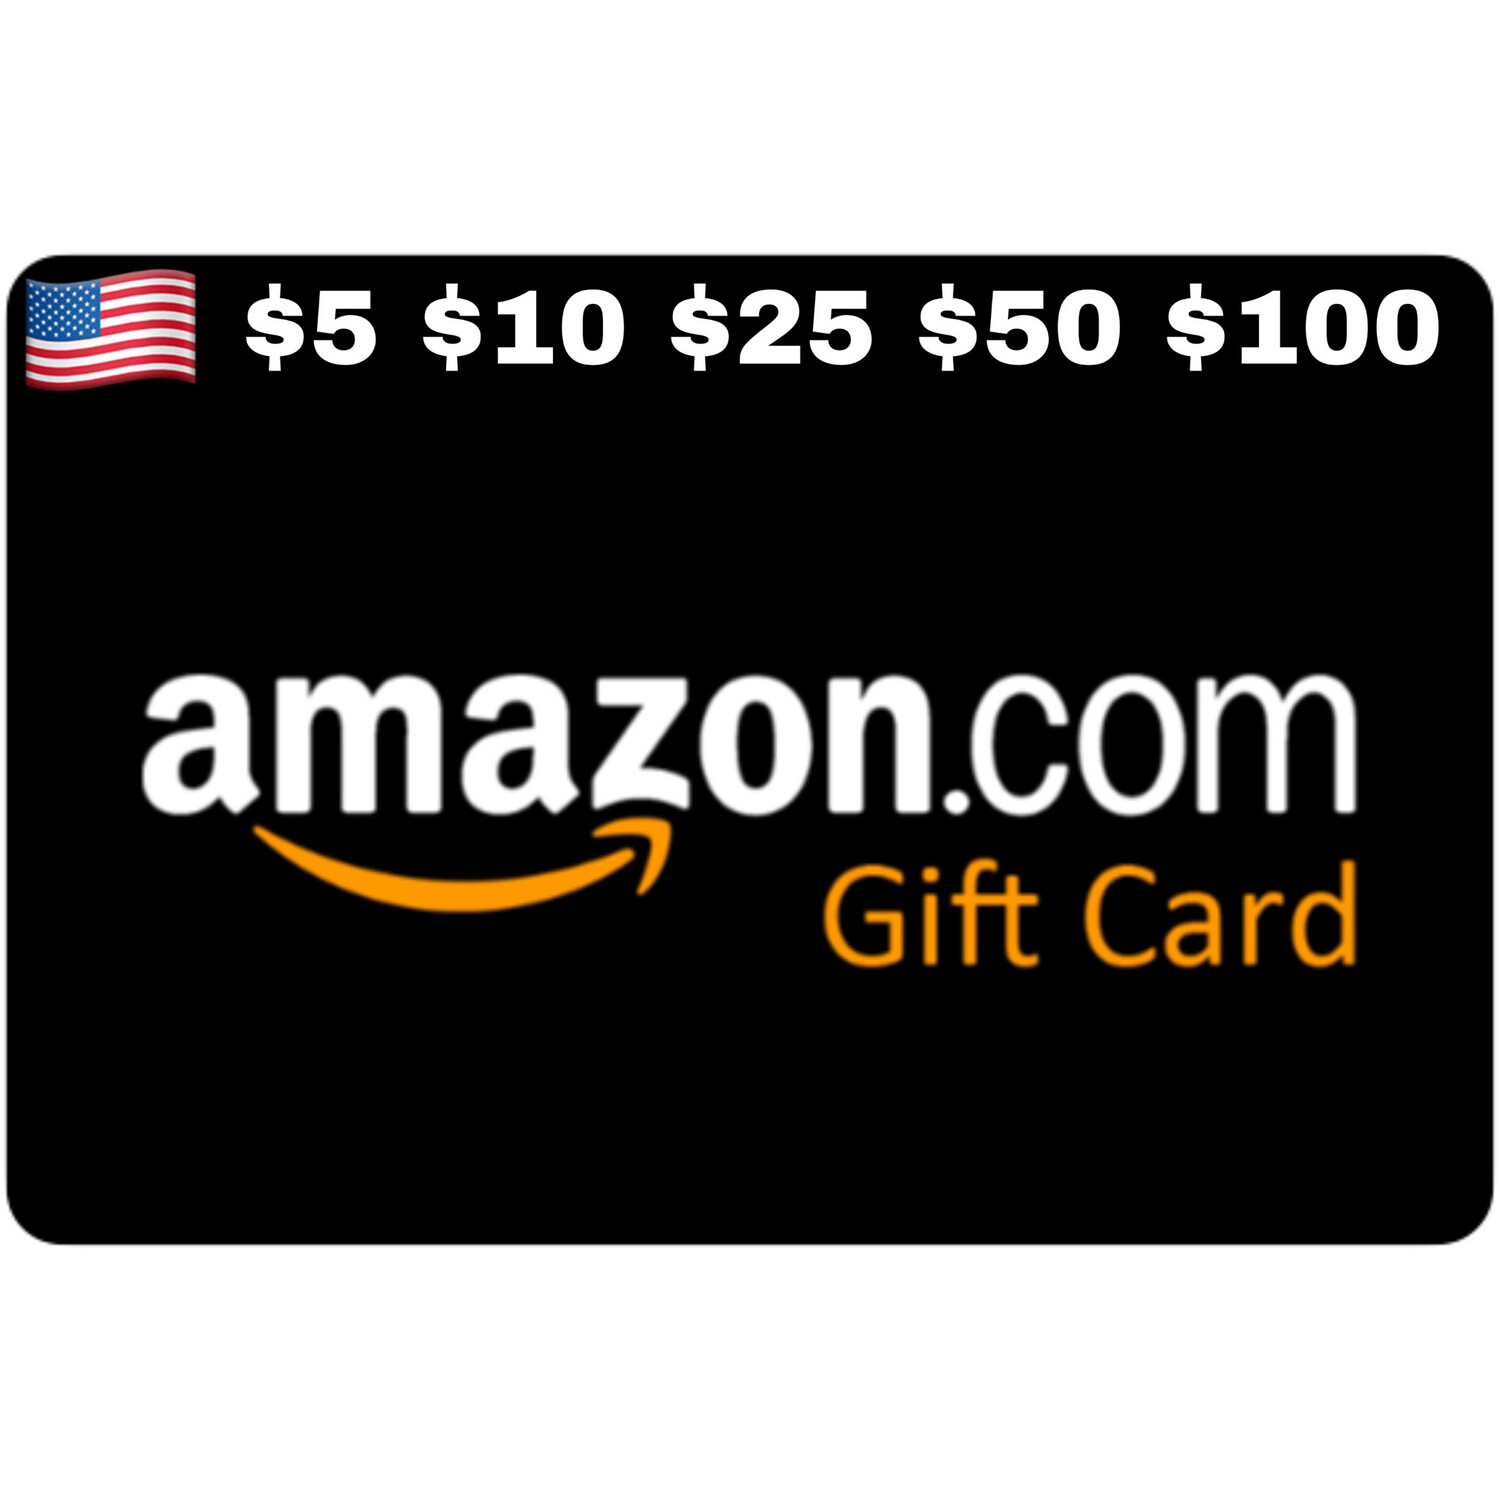 Amazon.com Gift Card US $5 $10 $25 $50 $100 Email Delivery